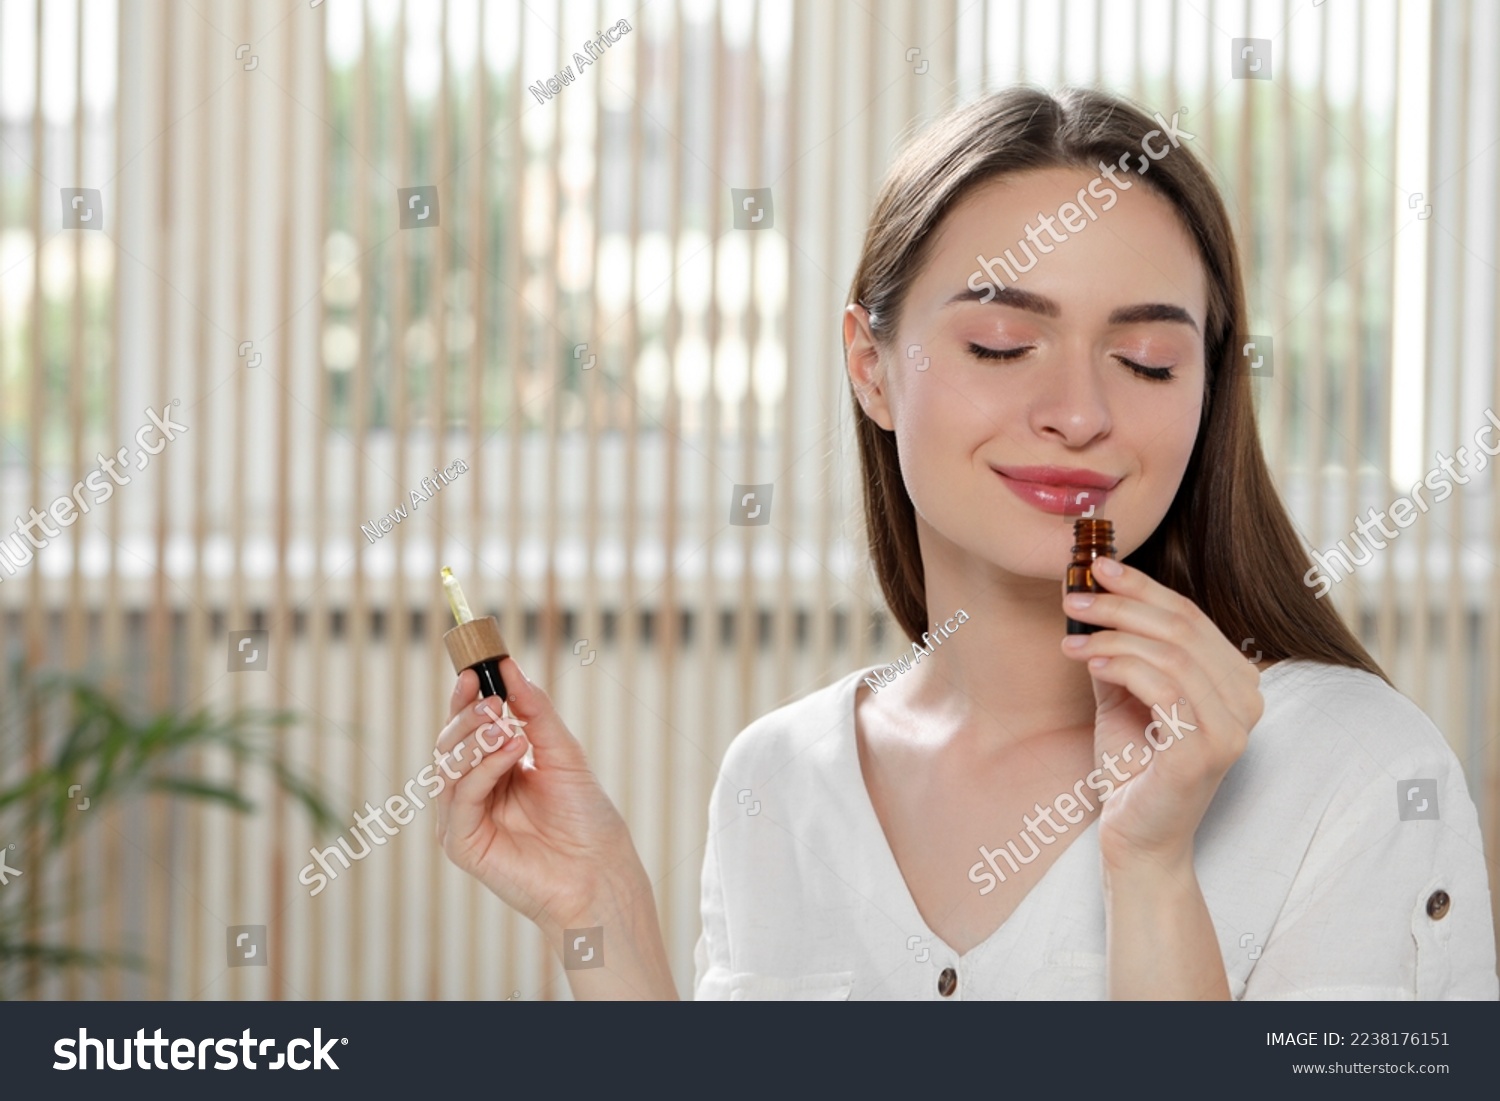 Young woman smelling essential oil indoors, space for text #2238176151